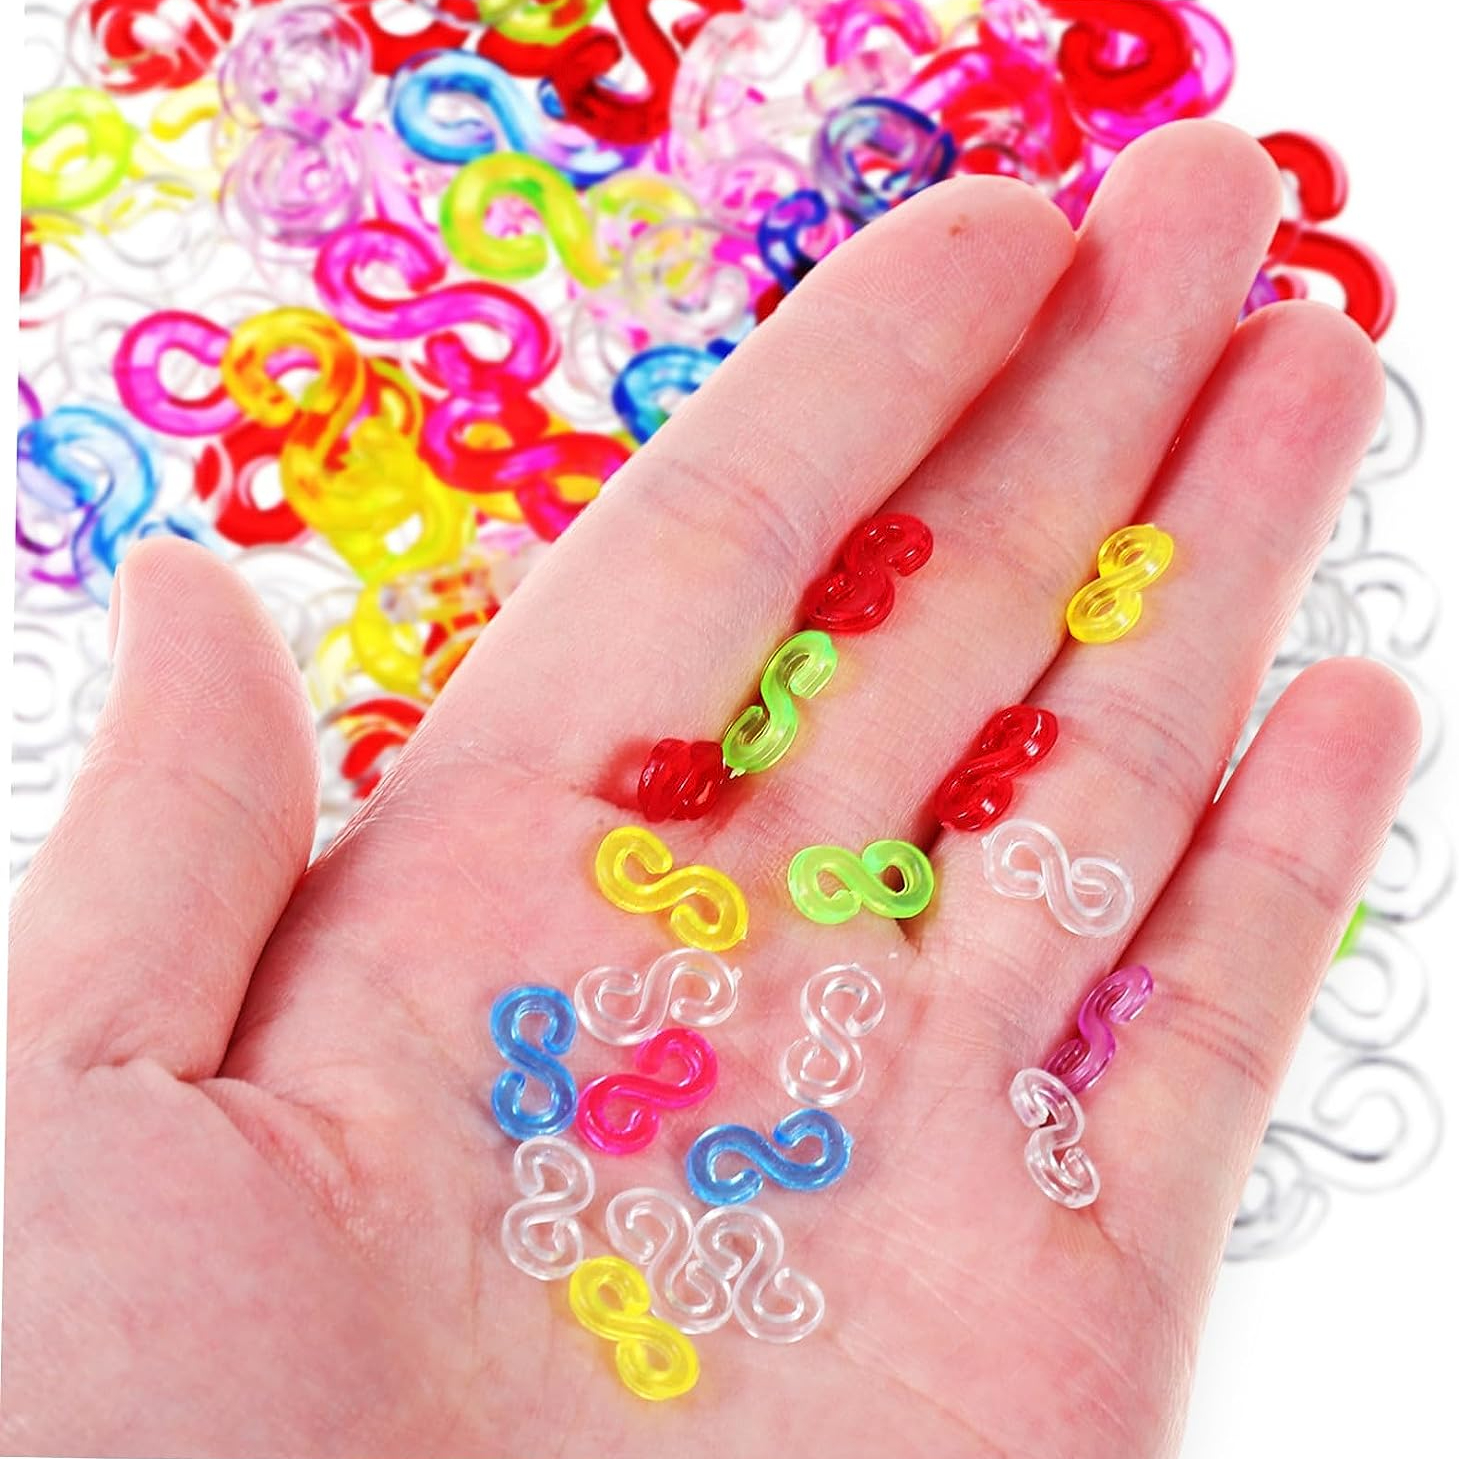 NOGIS 1200pcs S Clips for Rubber Band Bracelets, Colorful and Transparent  Loom Band Clips S Hooks for Loom Bracelets Plastic Loom Bracelet Connectors  for DIY Craft Making 